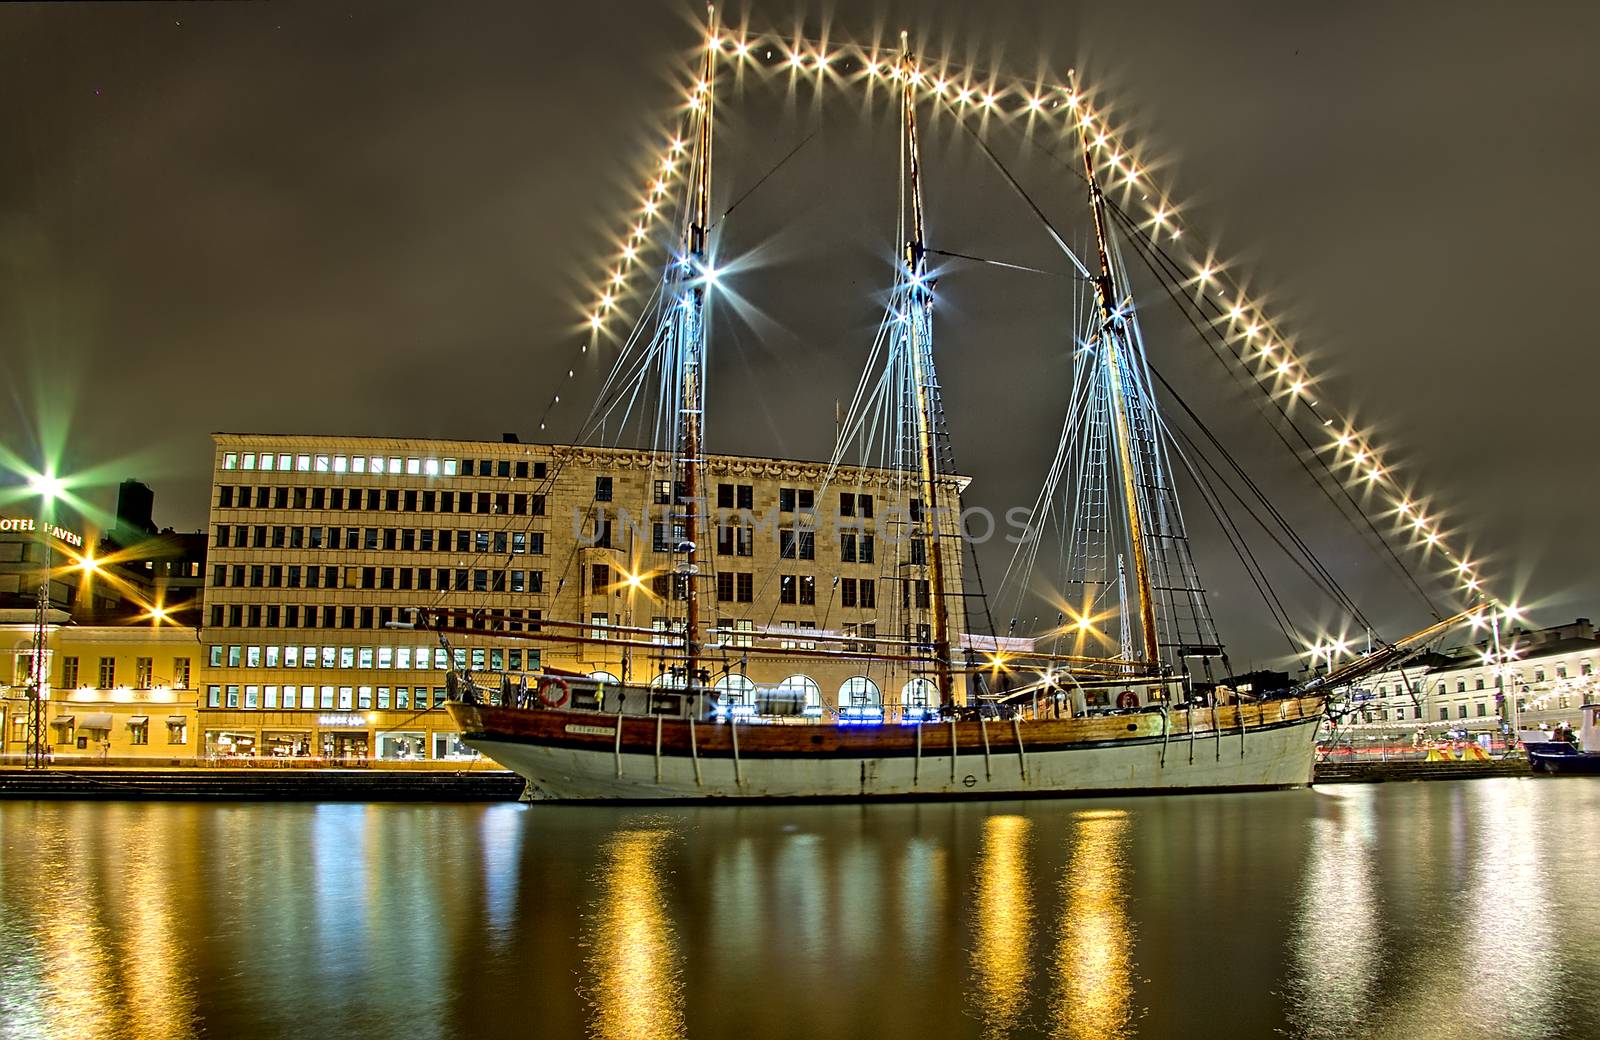 Night photo of a lighted old sailboat at the Kauppatori Helsinki. Photo taken in winter 2018 in Helsinki, Finland